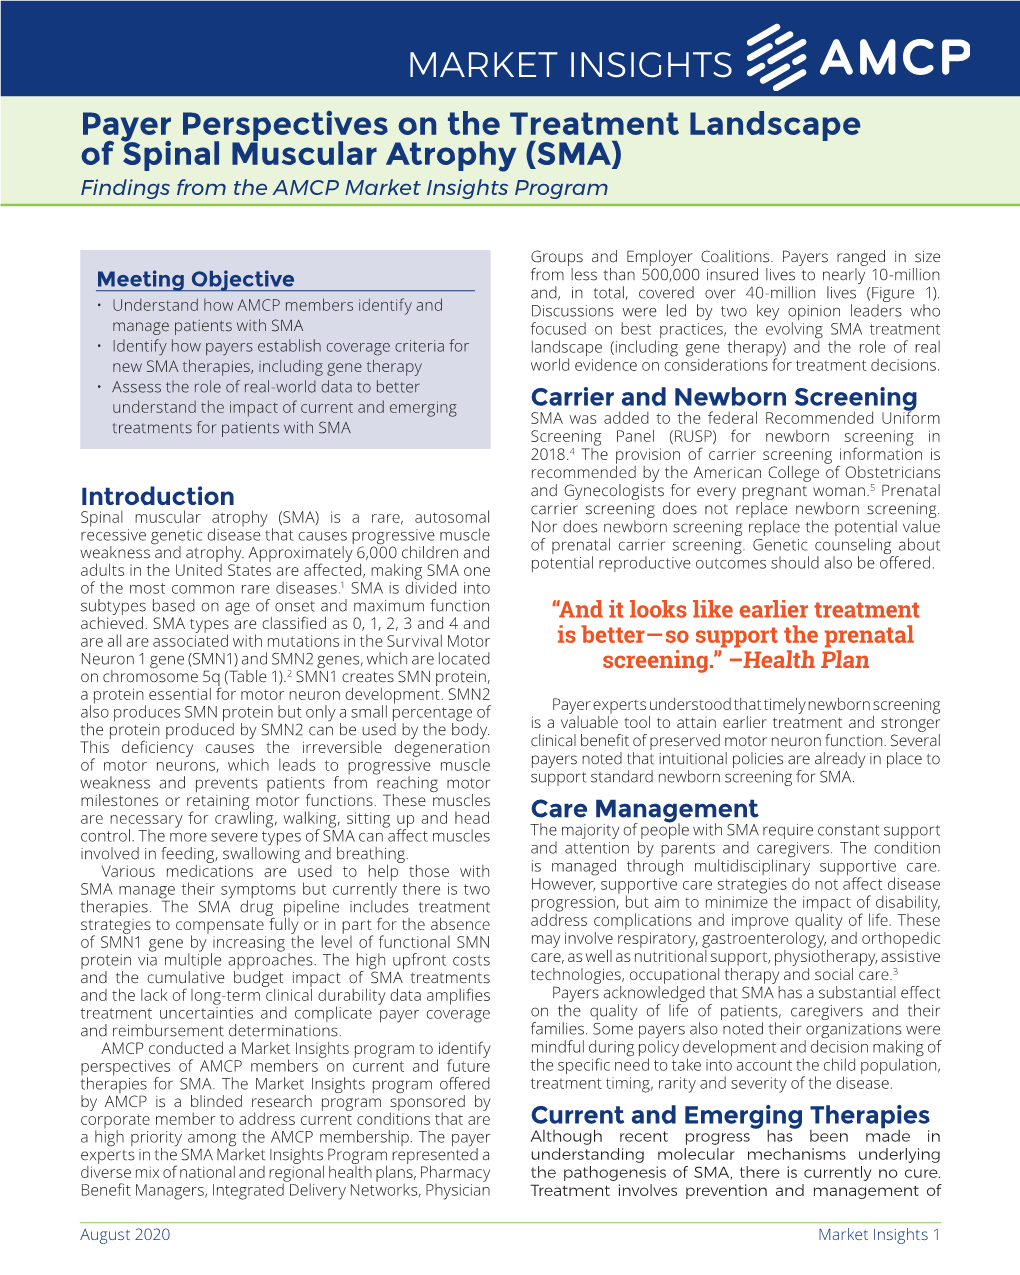 Payer Perspectives on the Treatment Landscape of Spinal Muscular Atrophy (SMA) Findings from the AMCP Market Insights Program